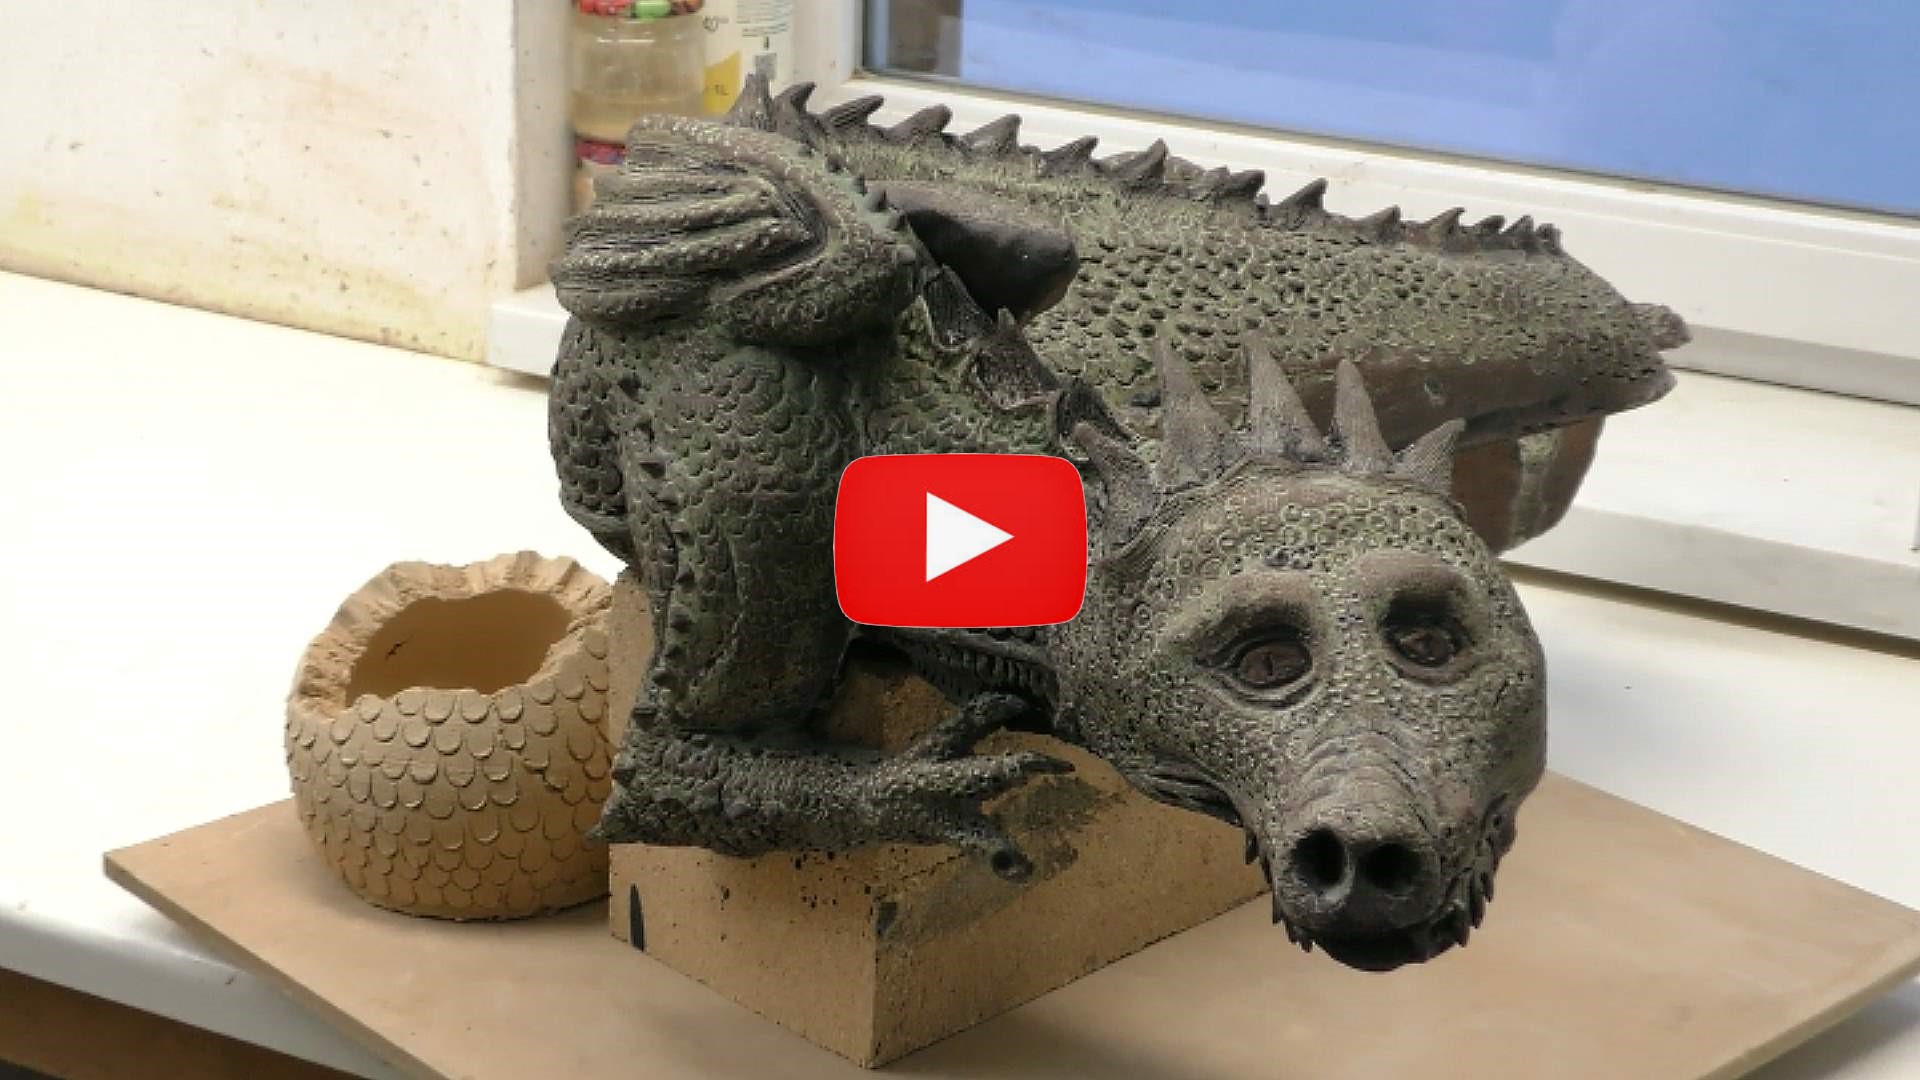 Video: The creation of the dragon